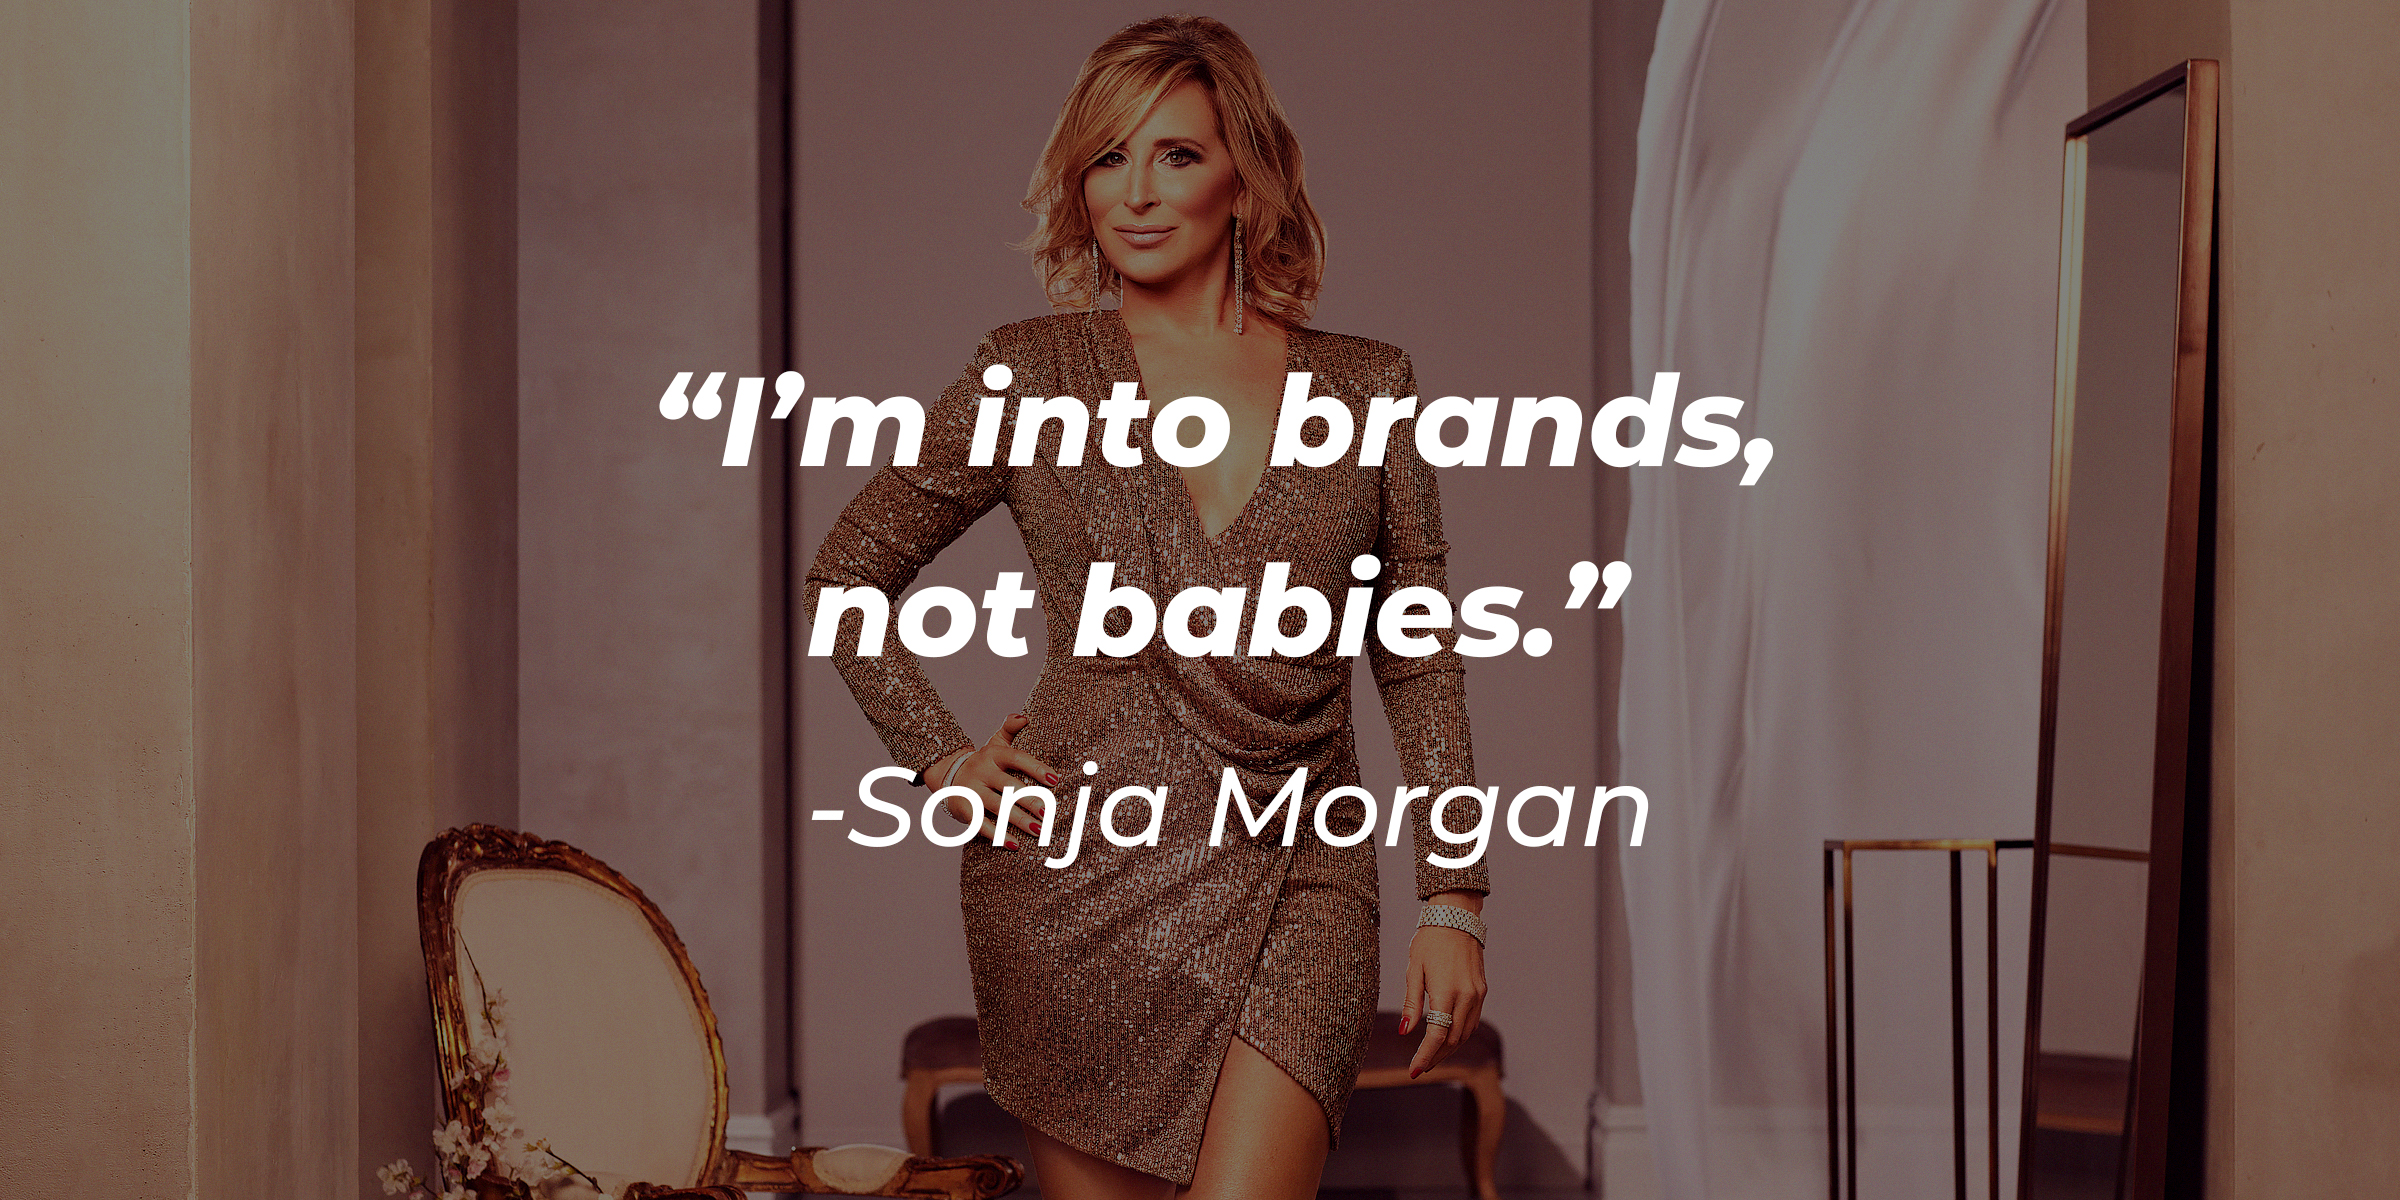 Sonja Morgan with her quote: "I'm into brands, not babies." | Source: Getty Images